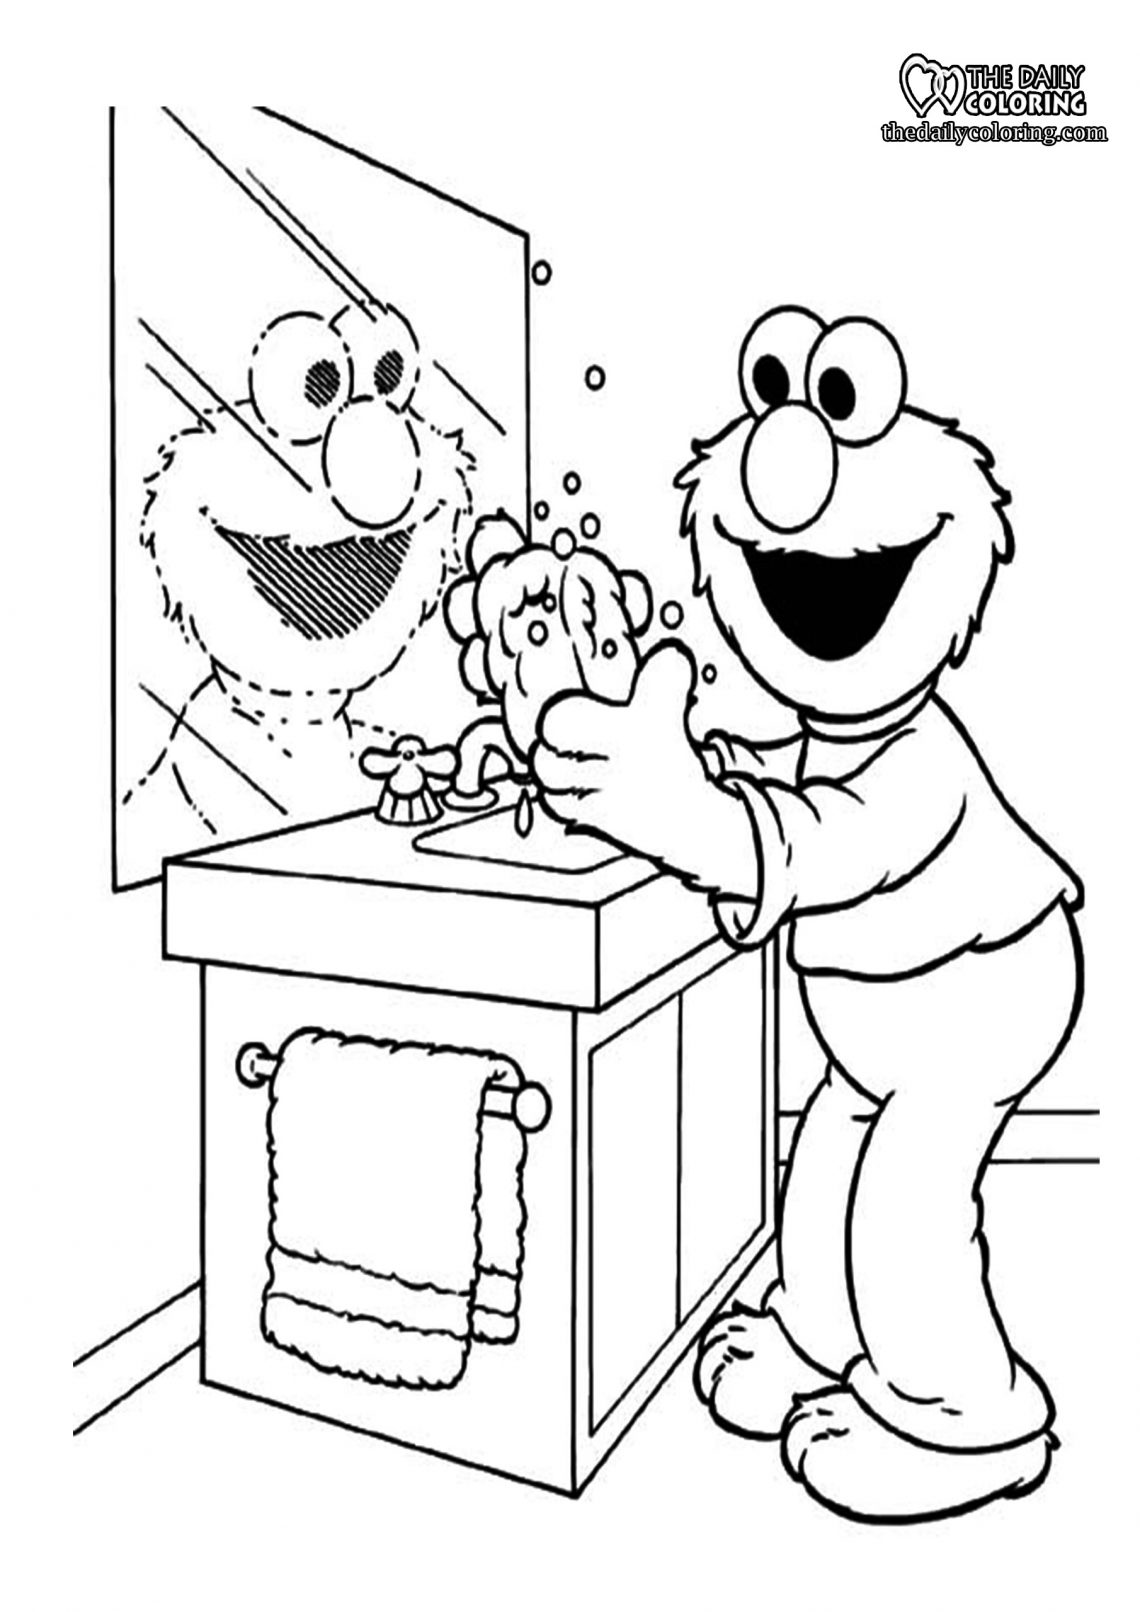 Cleaning Coloring Pages - The Daily Coloring